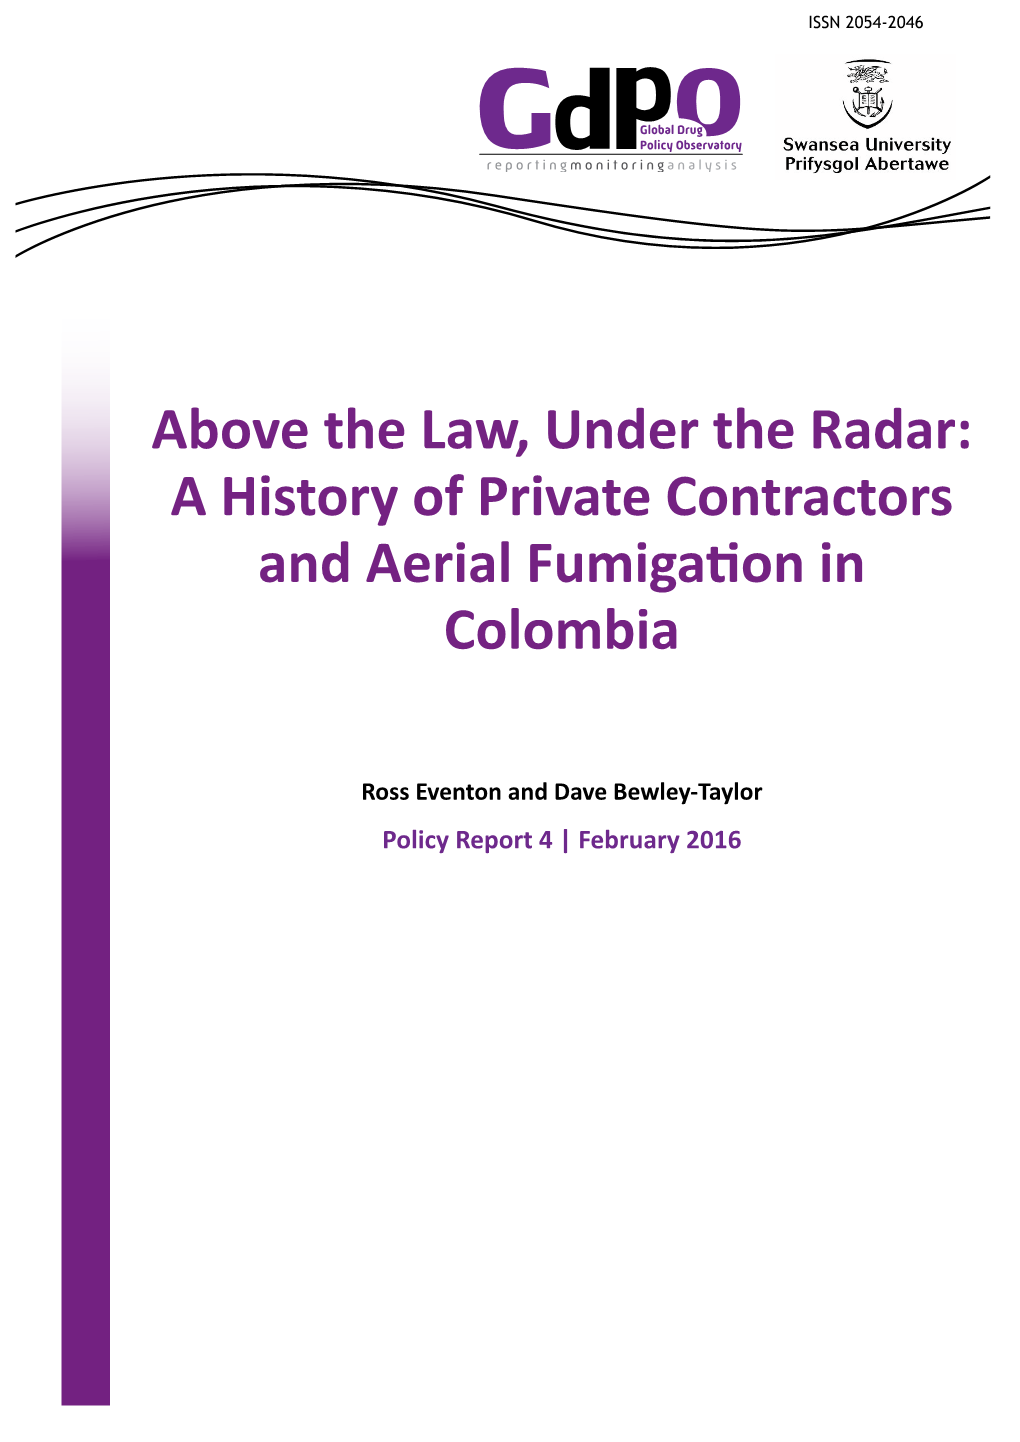 A History of Private Contractors and Aerial Fumigation in Colombia